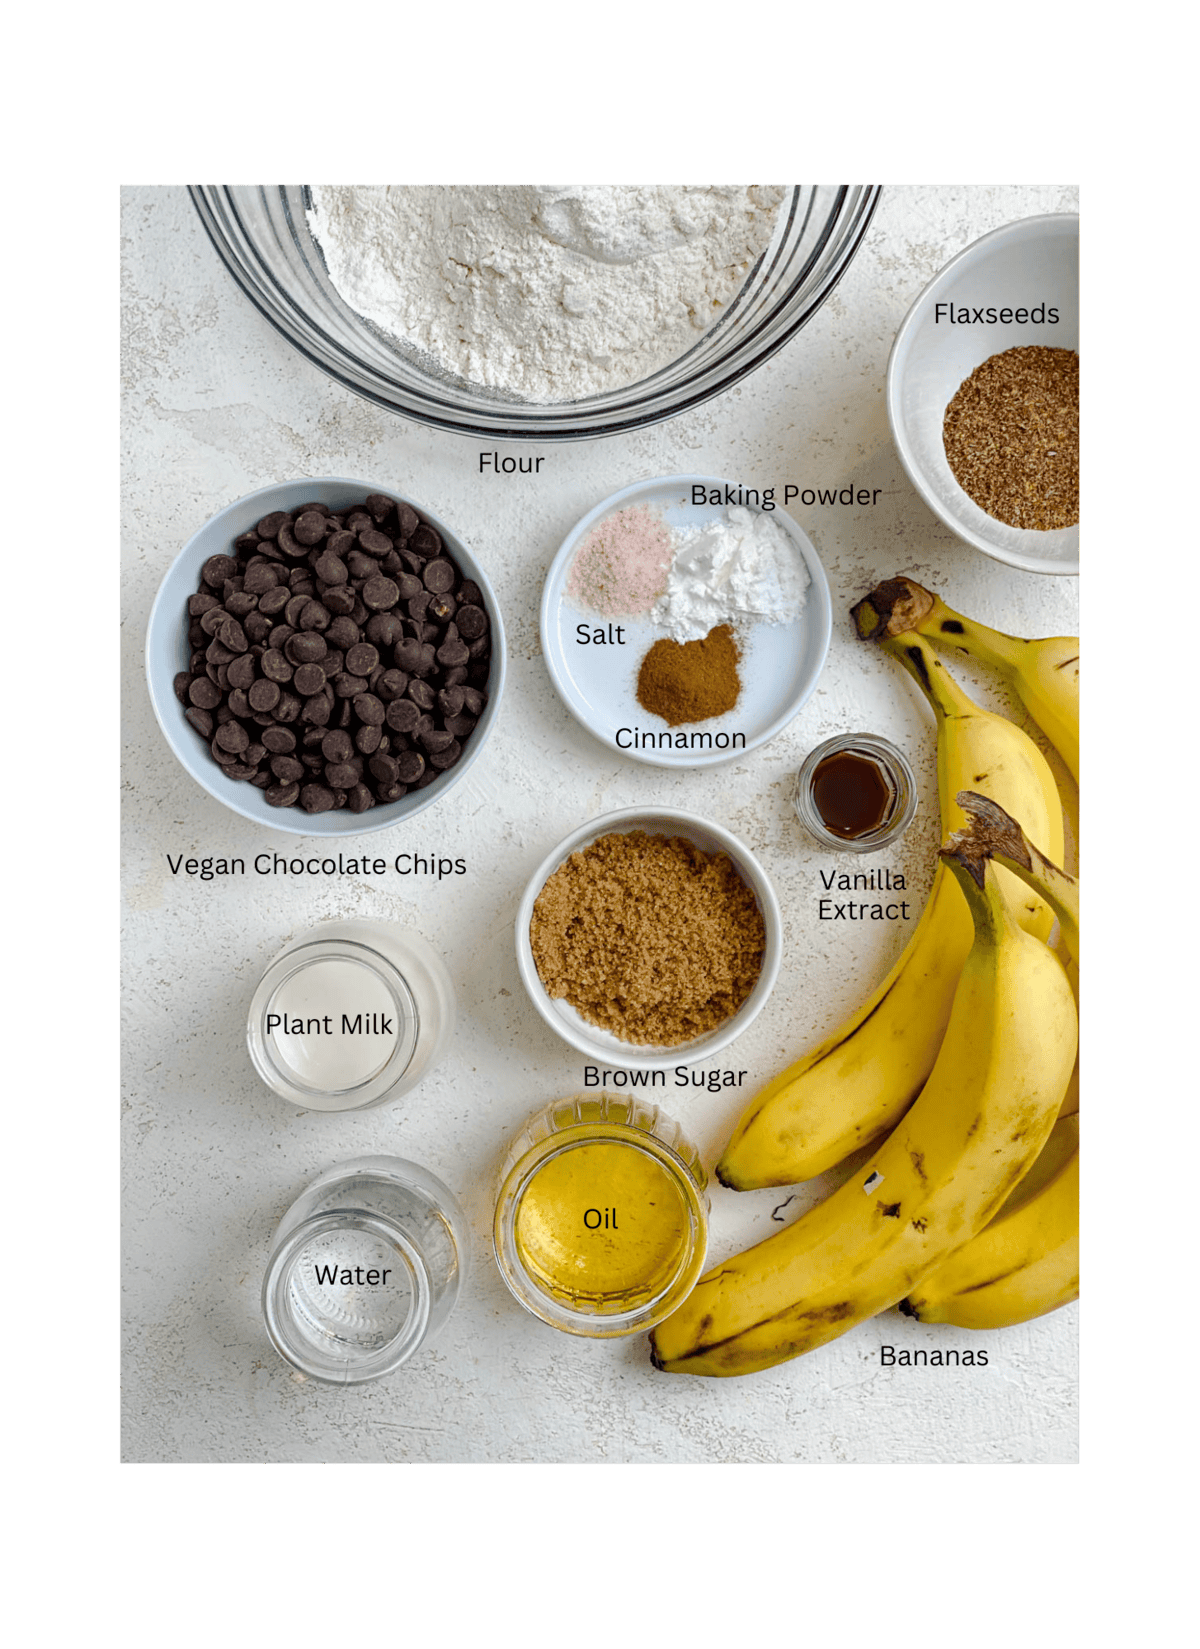 ingredients for Banana Chocolate Chip Bars measured out on a white surface